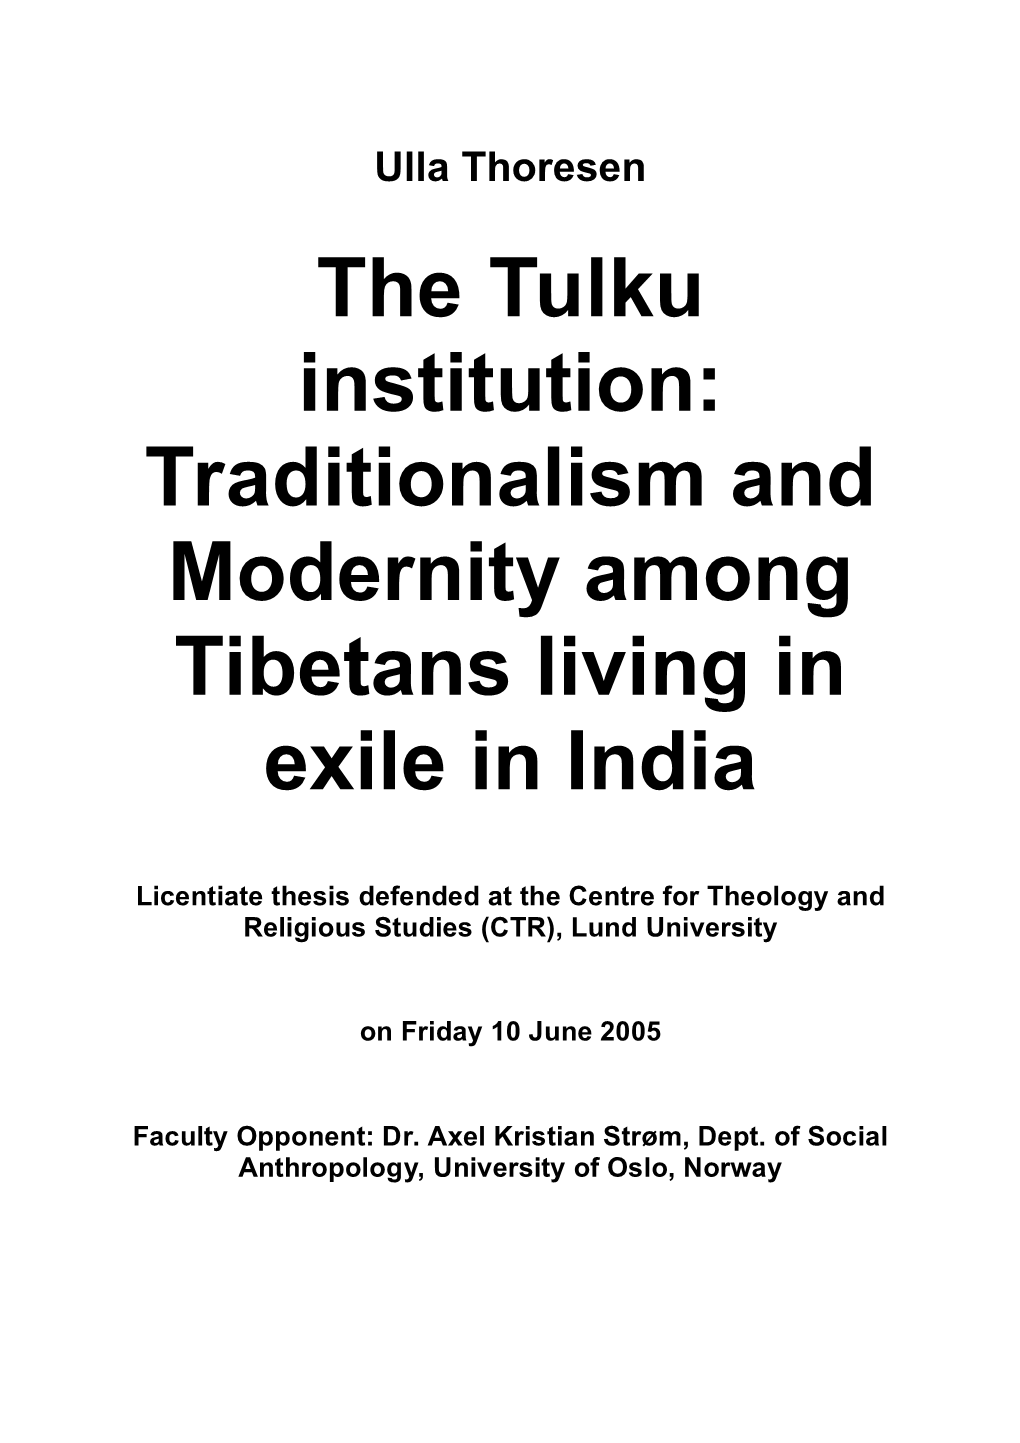 The Tulku Institution: Traditionalism and Modernity Among Tibetans Living in Exile in India